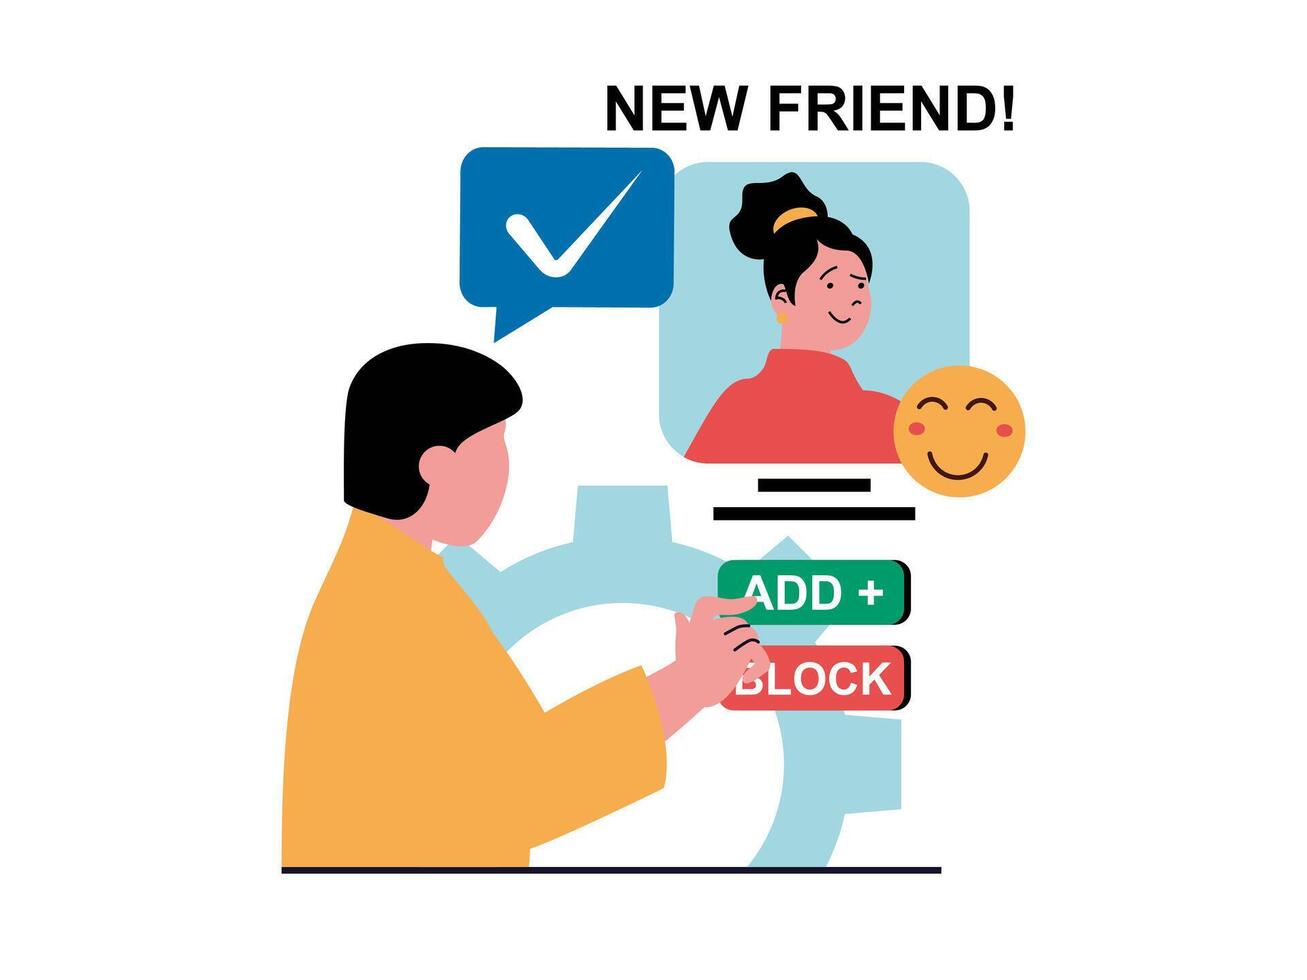 Social network concept with character situation. Man received friend request from woman and chooses to add or block, uses online profile. Vector illustration with people scene in flat design for web